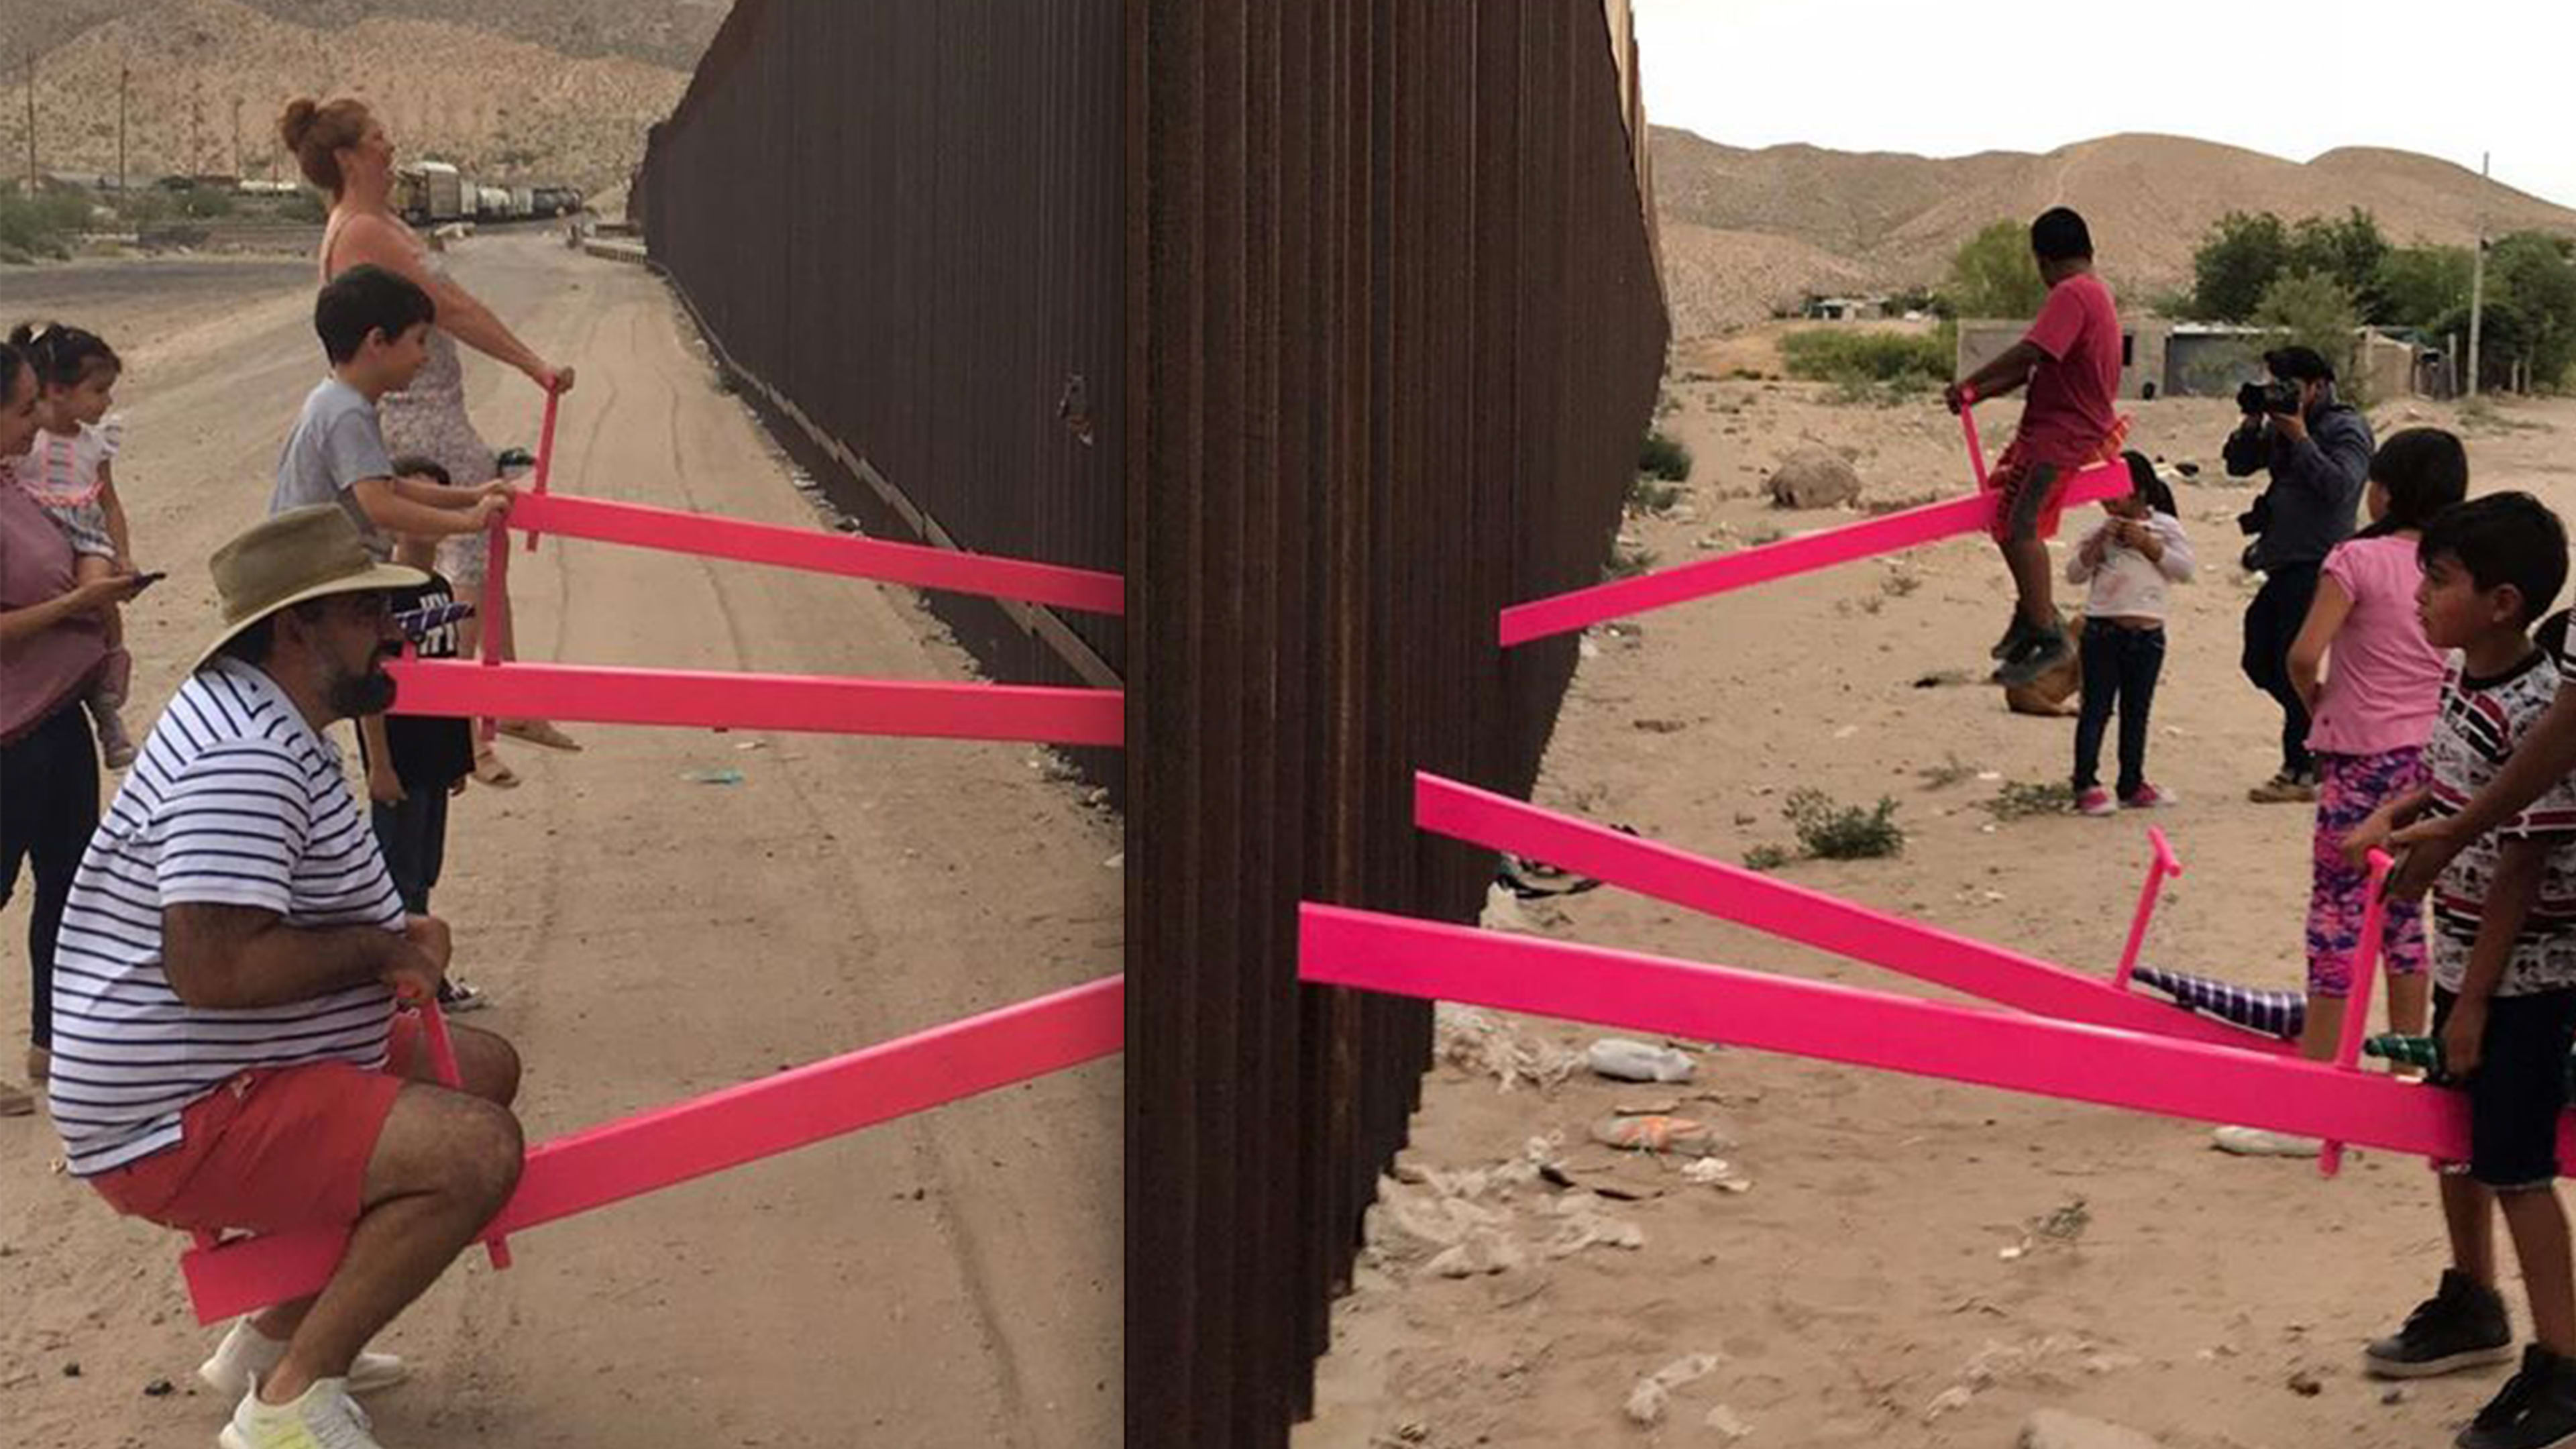 This video of kids playing on seesaws at the border is a reminder of our shared humanity